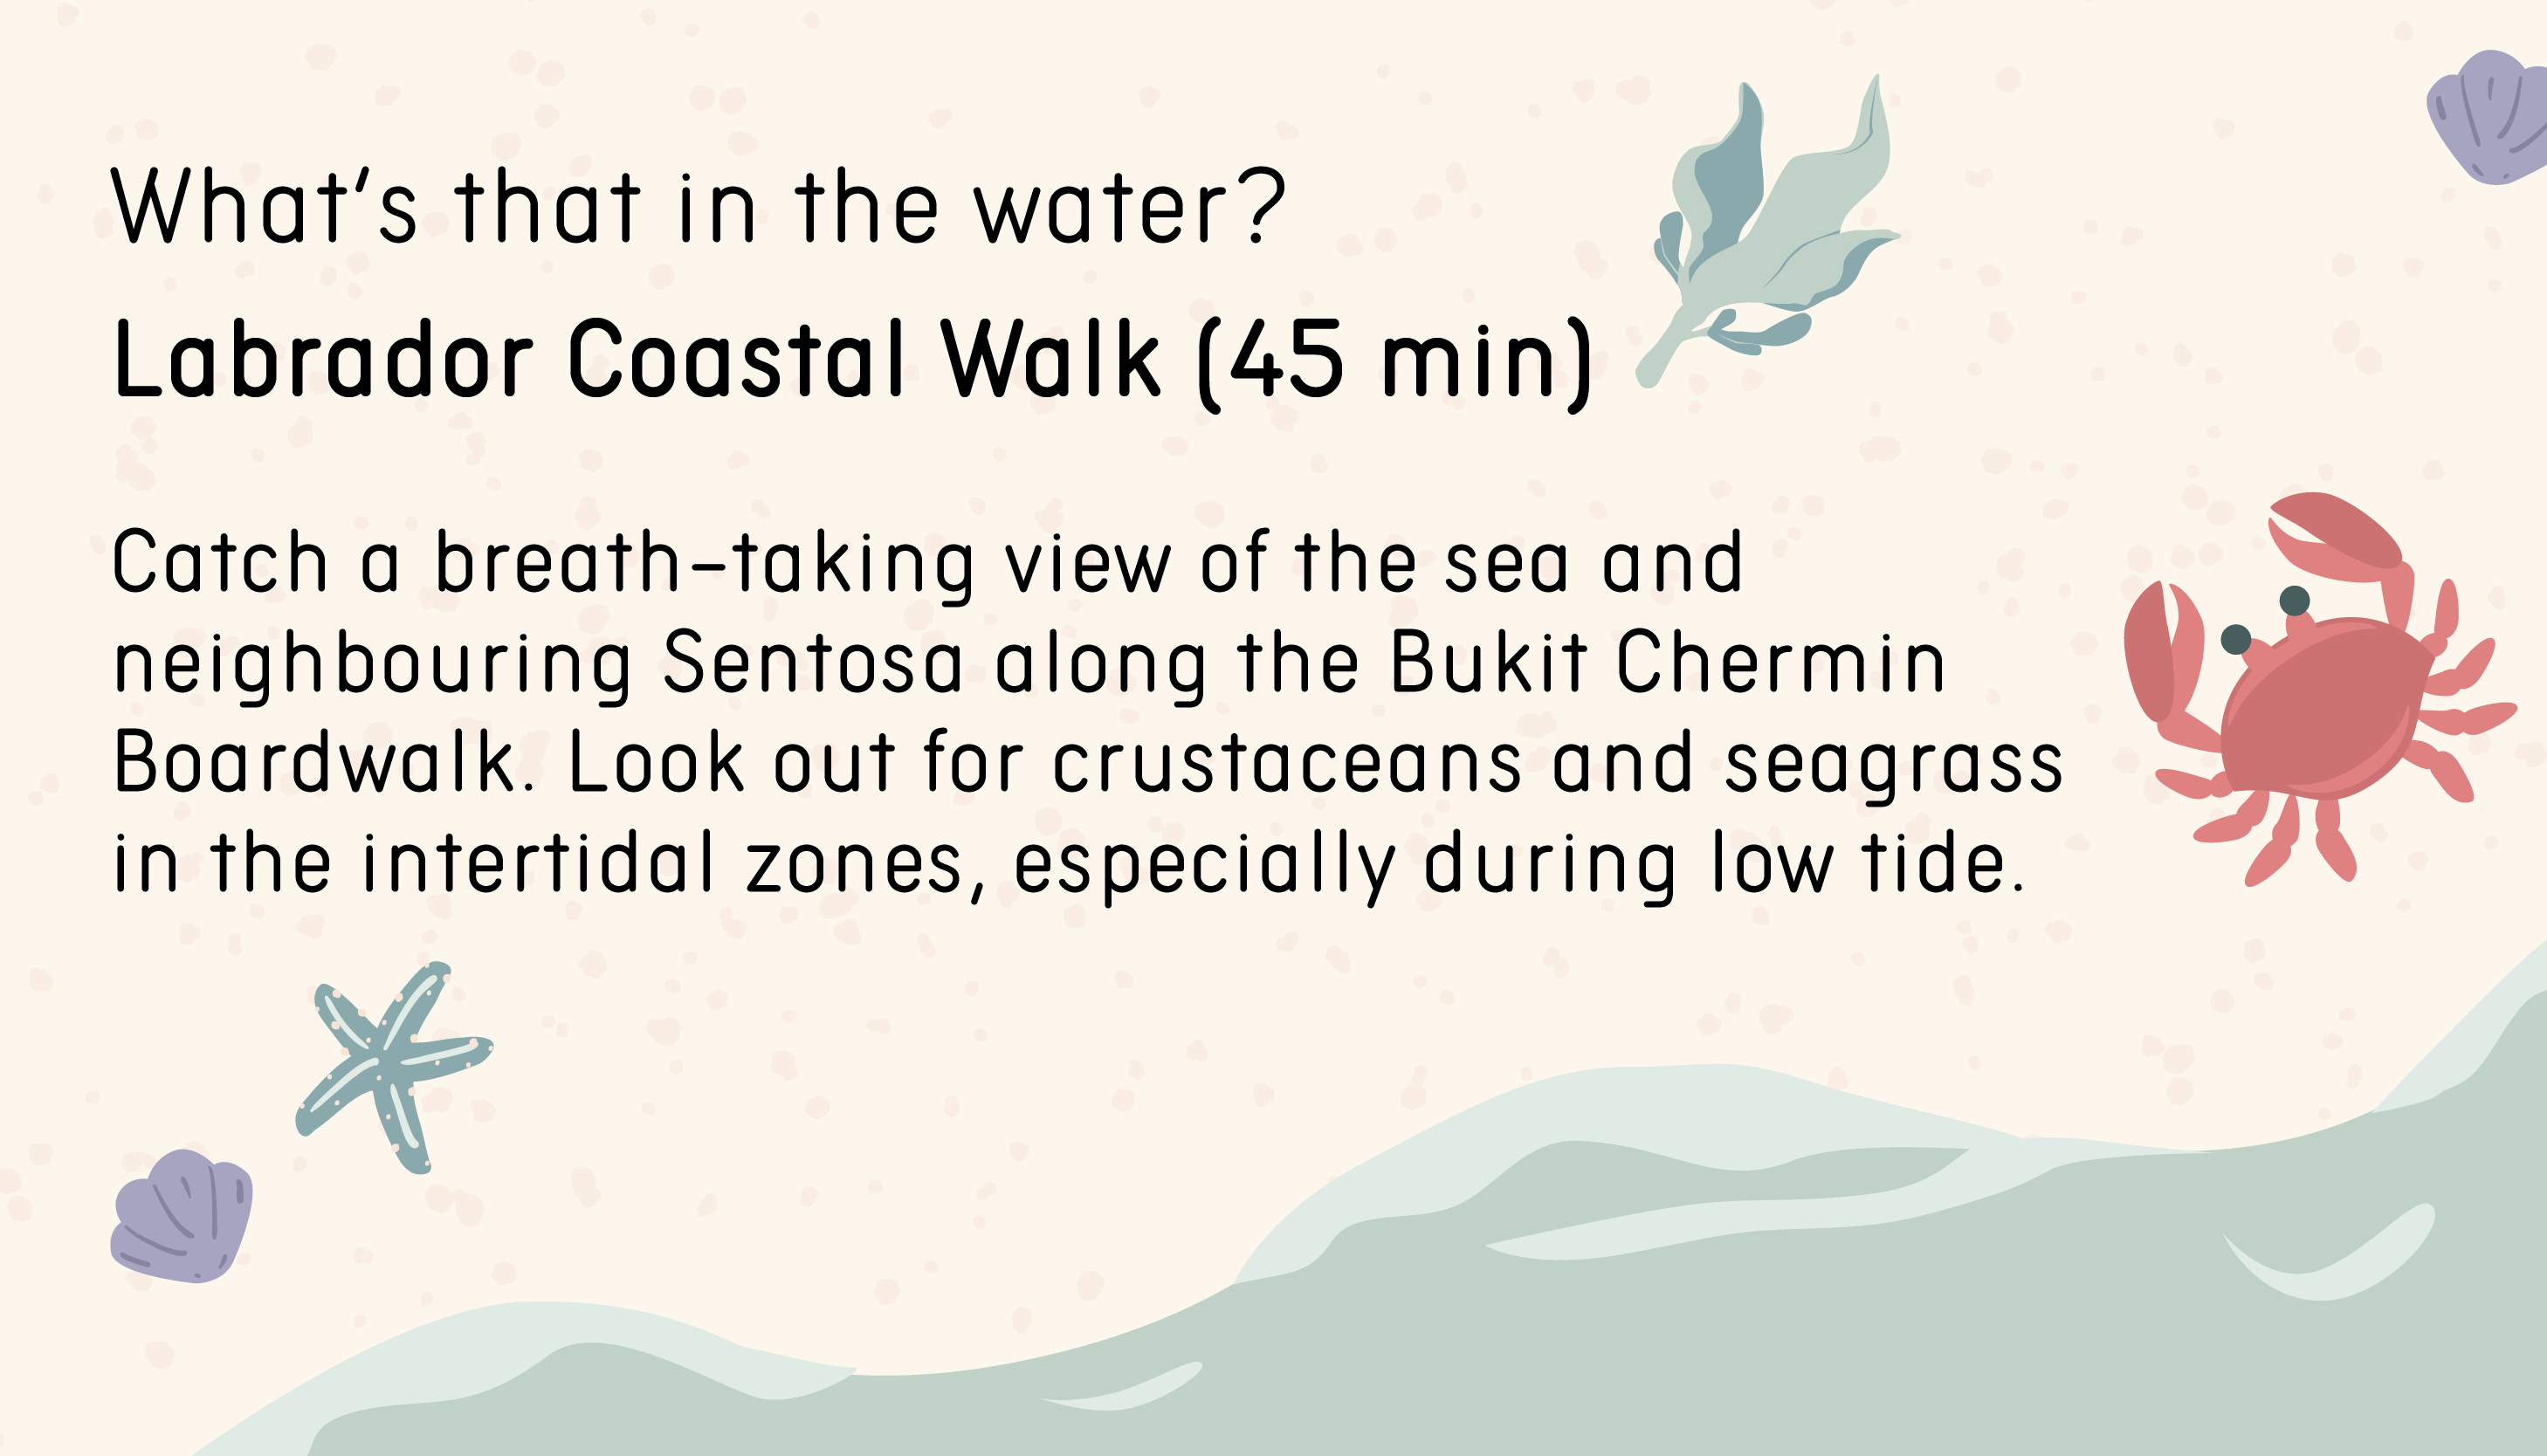 What’s that in the water? Labrador Coastal Walk (45 min). Catch a breath-taking view of the sea and neighbouring Sentosa along the Bukit Chermin Boardwalk. Look out for crustaceans and seagrass in the intertidal zones, especially during low tide.